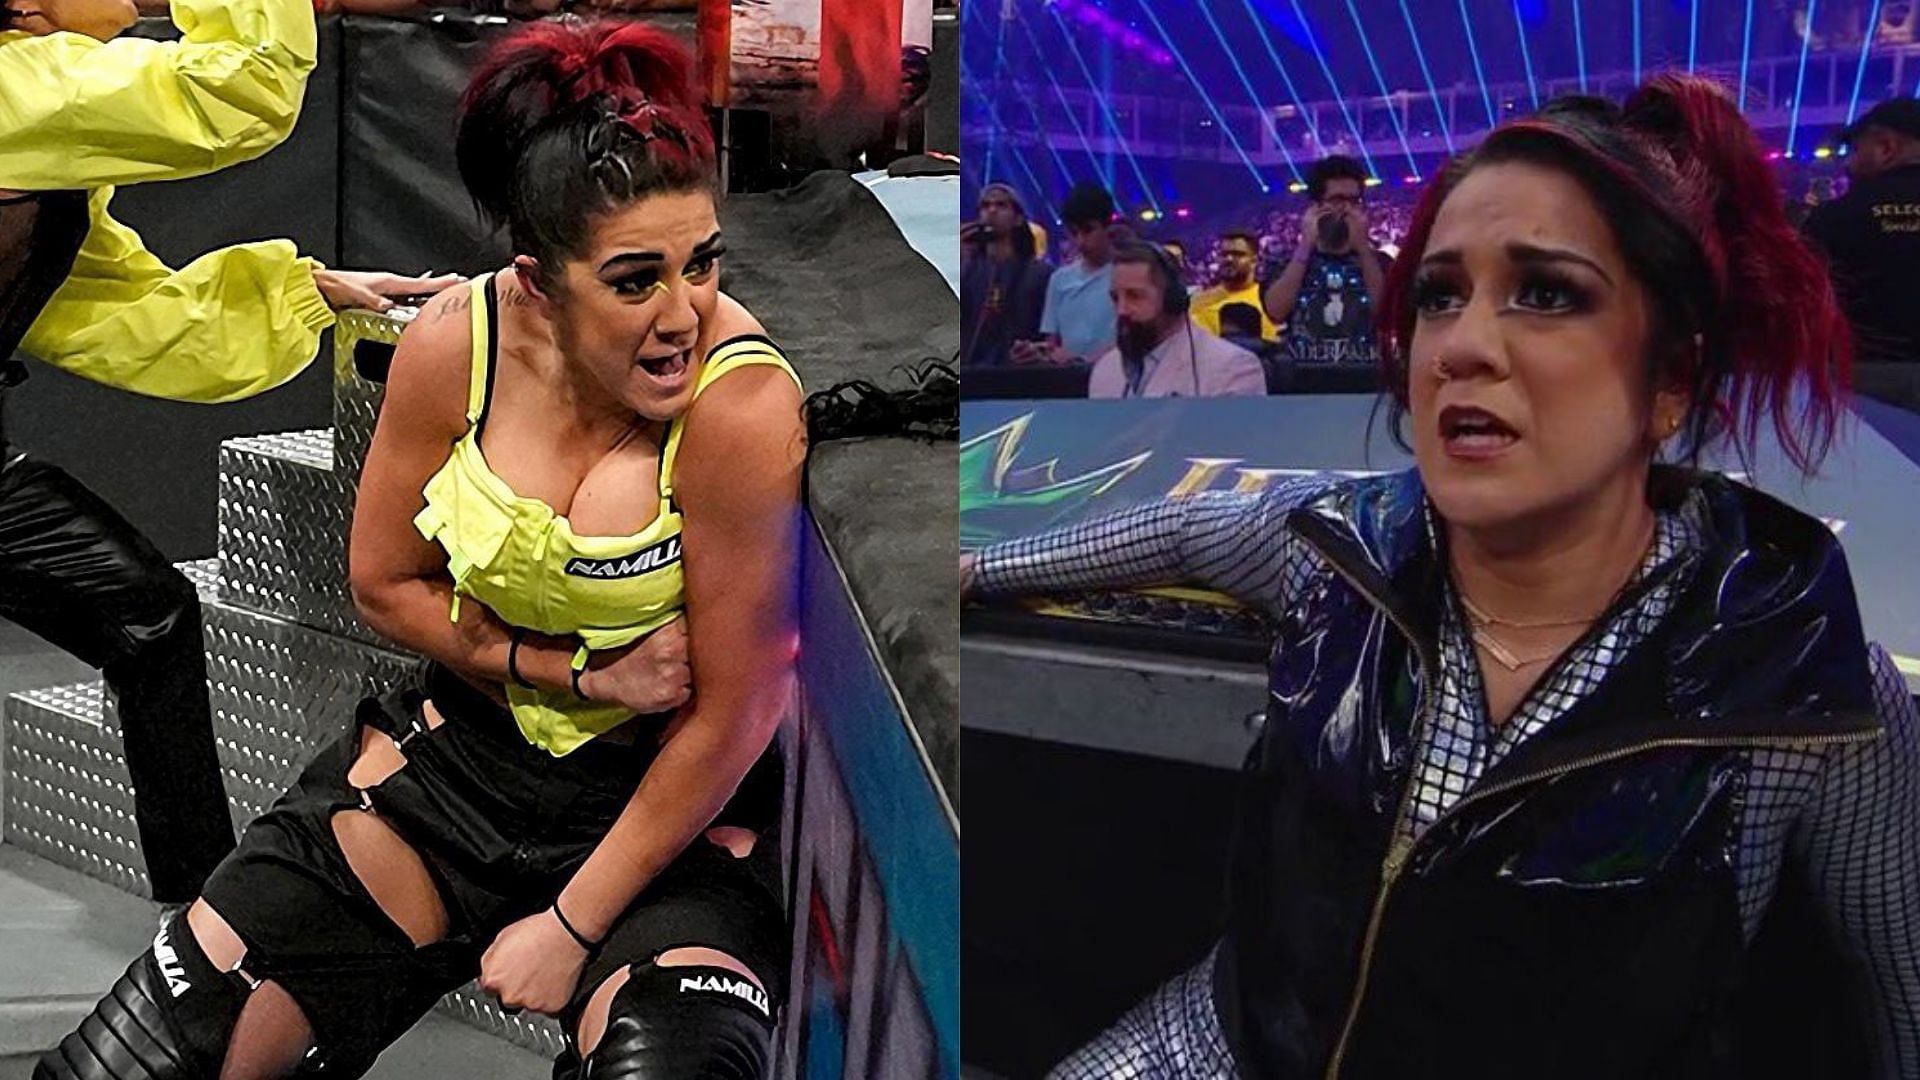 IYO SKY and Bayley had a moment of tension at Crown Jewel